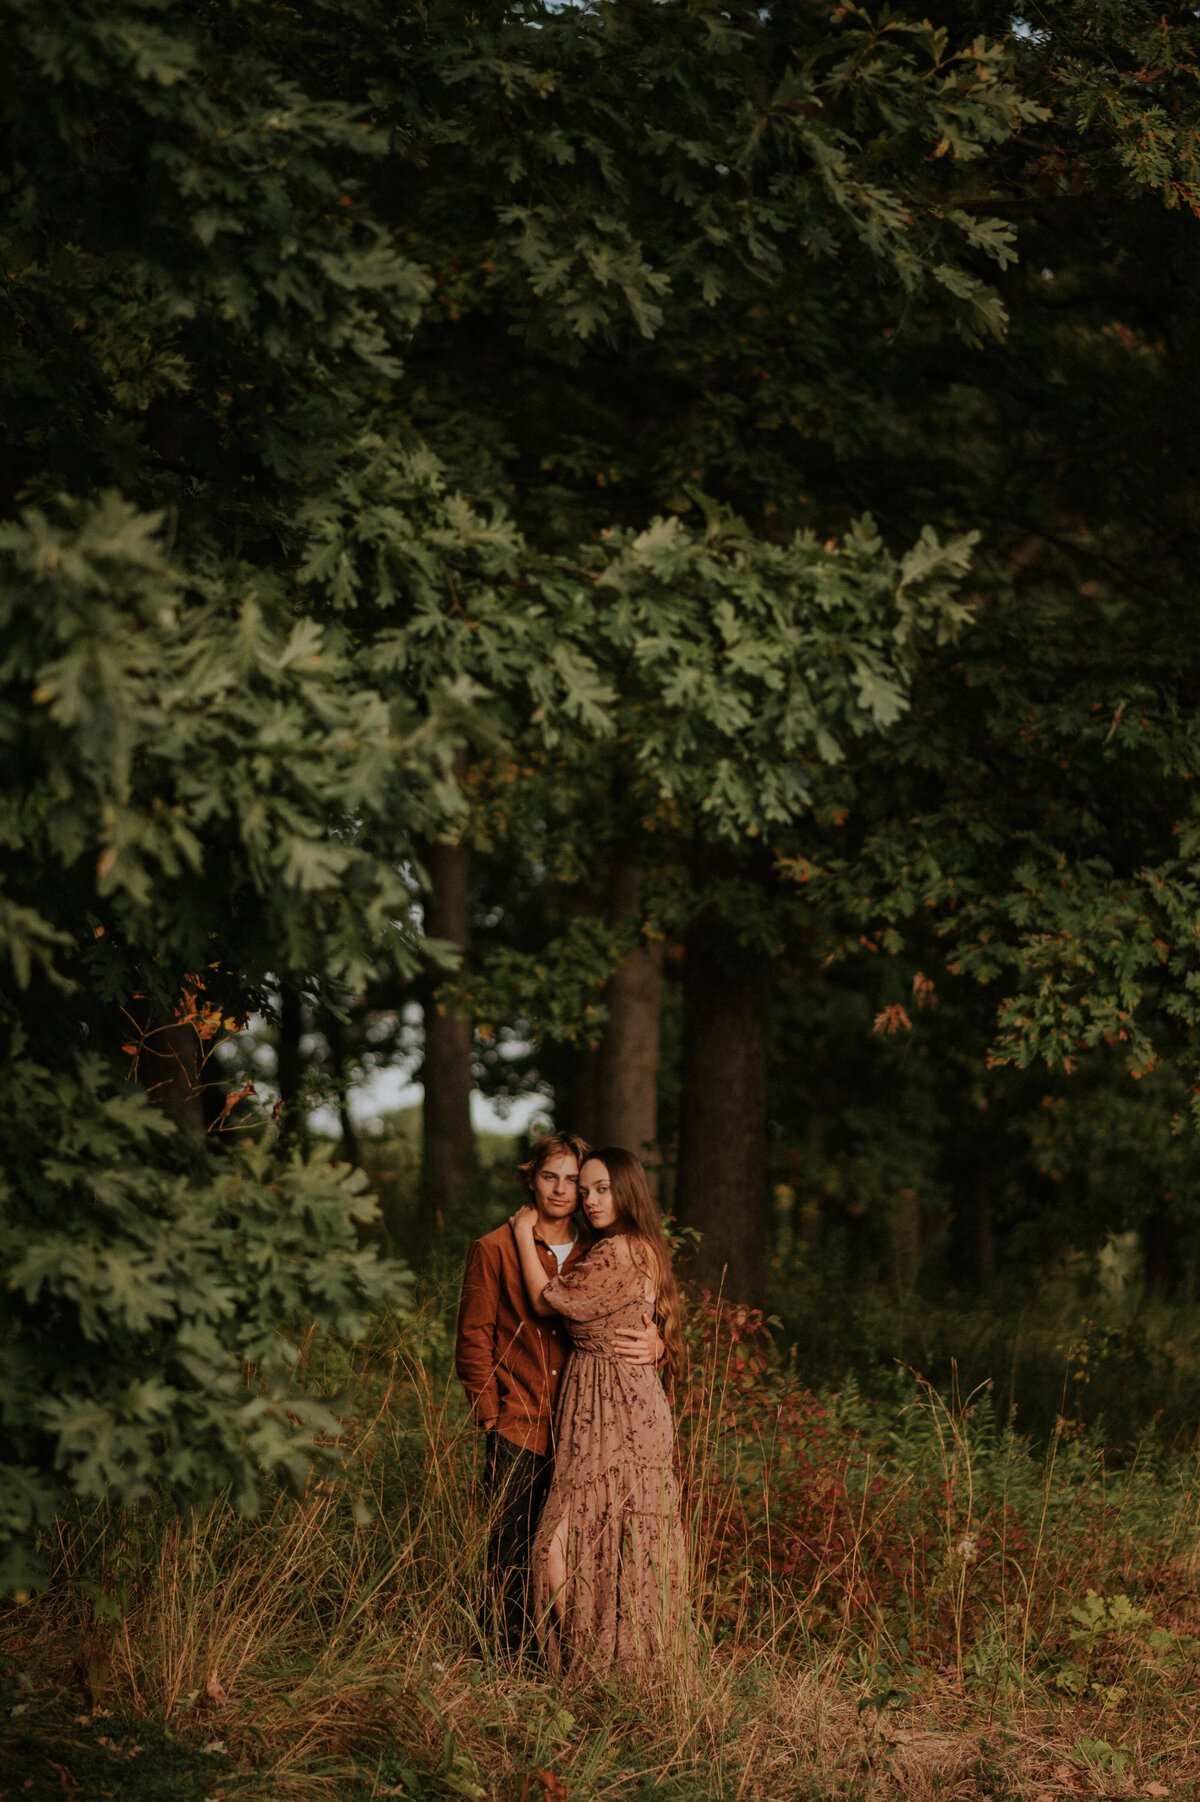 Experience woodland whimsy with Shannon Kathleen Photography. Elevate your family photography in the Twin Cities. Book now for enchanting outdoor portraits